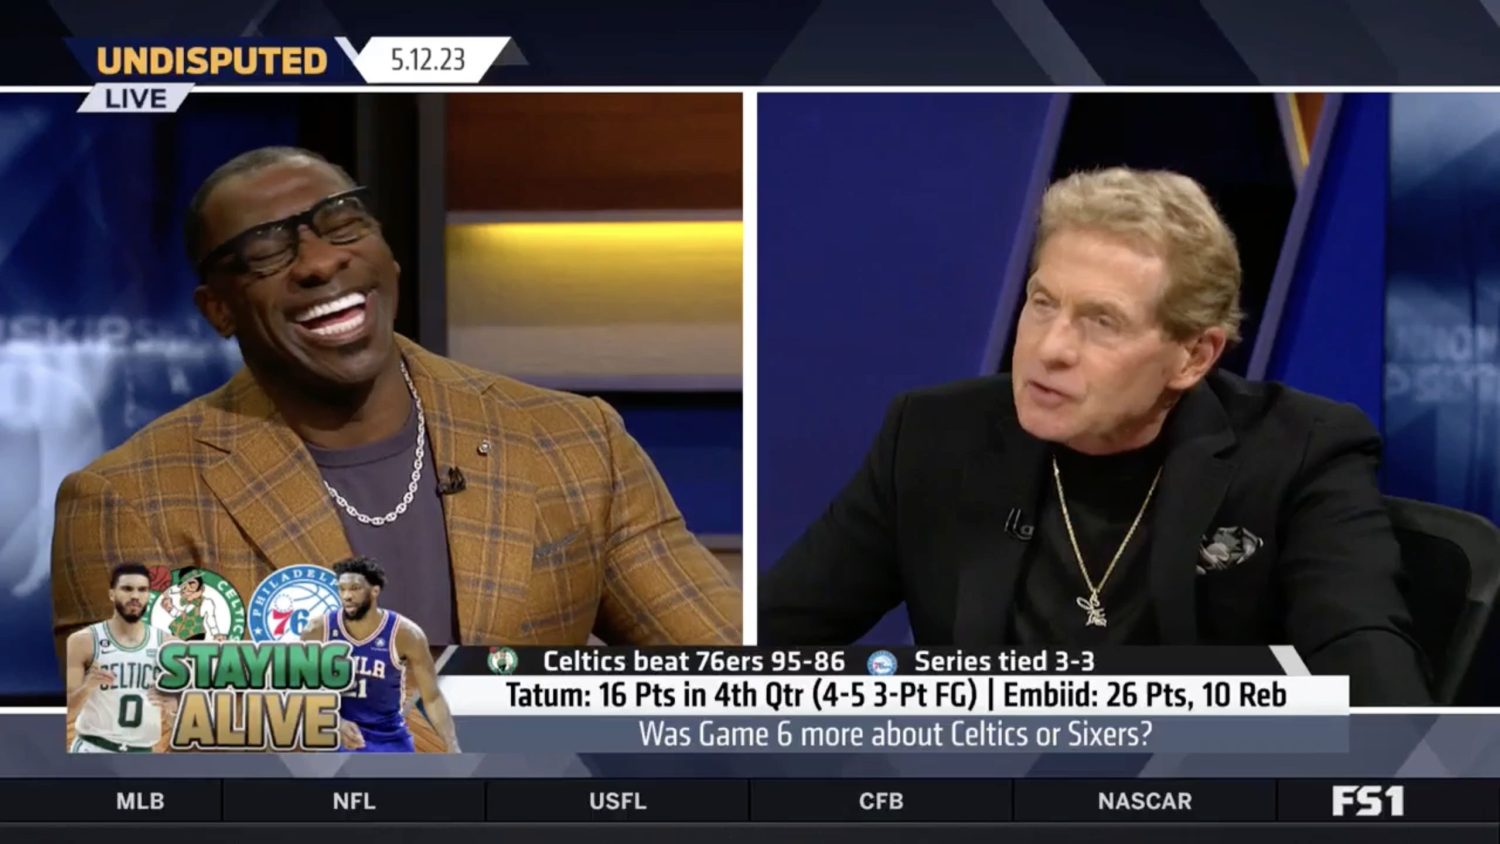 Skip Bayless says the 76ers pooped all over